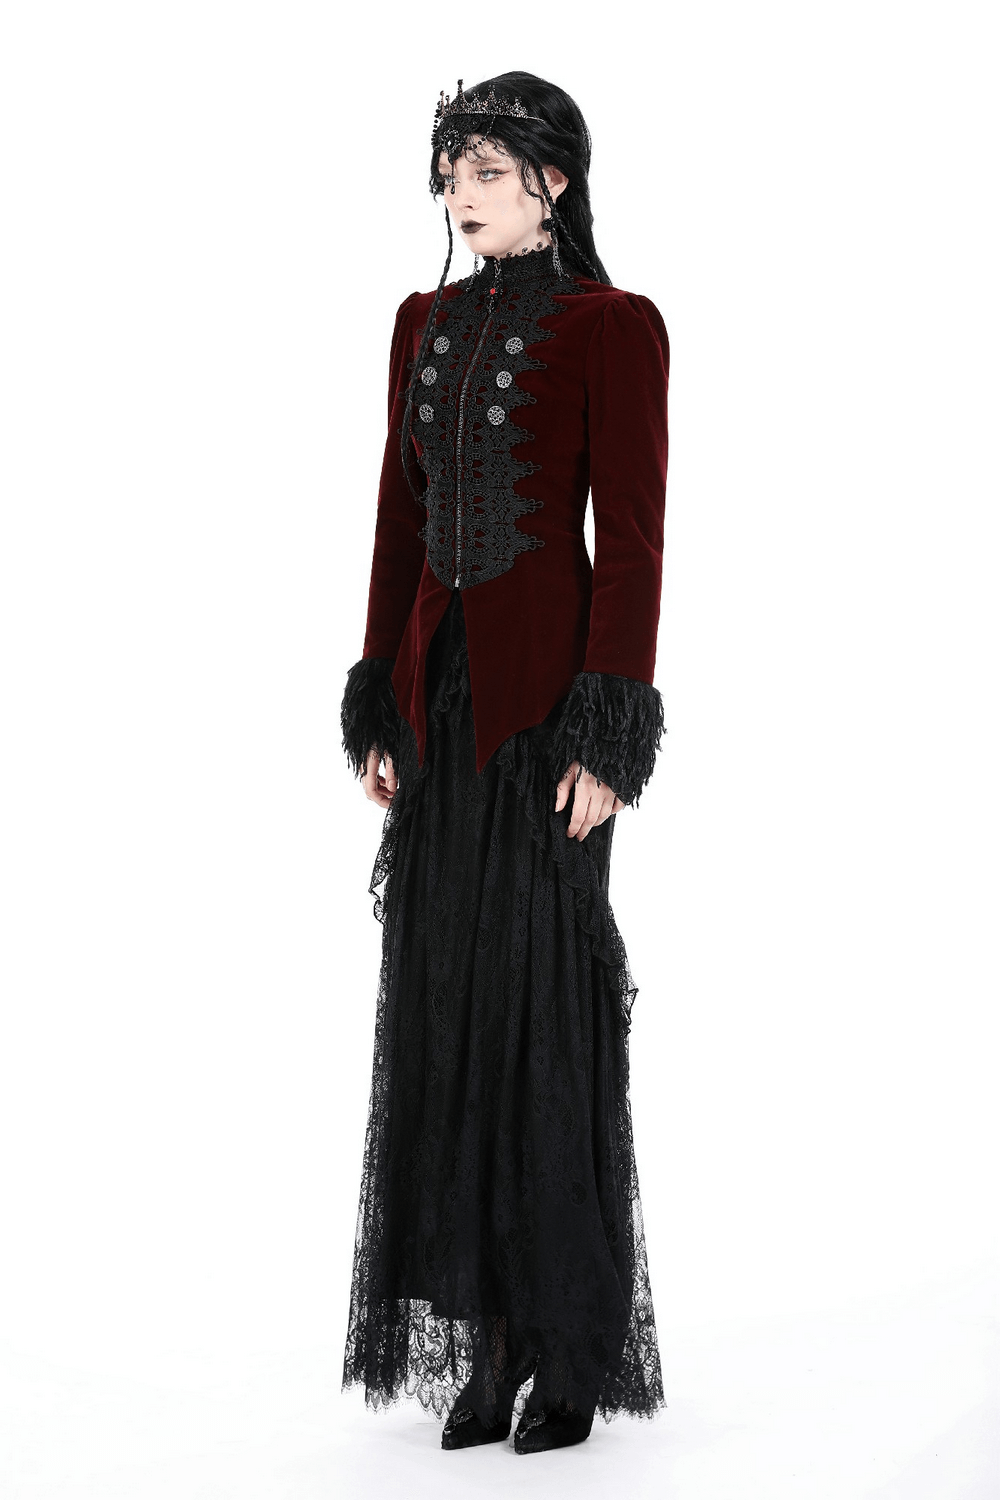 Women's Burgundy Velvet Jacket with Black Lace and Feathers